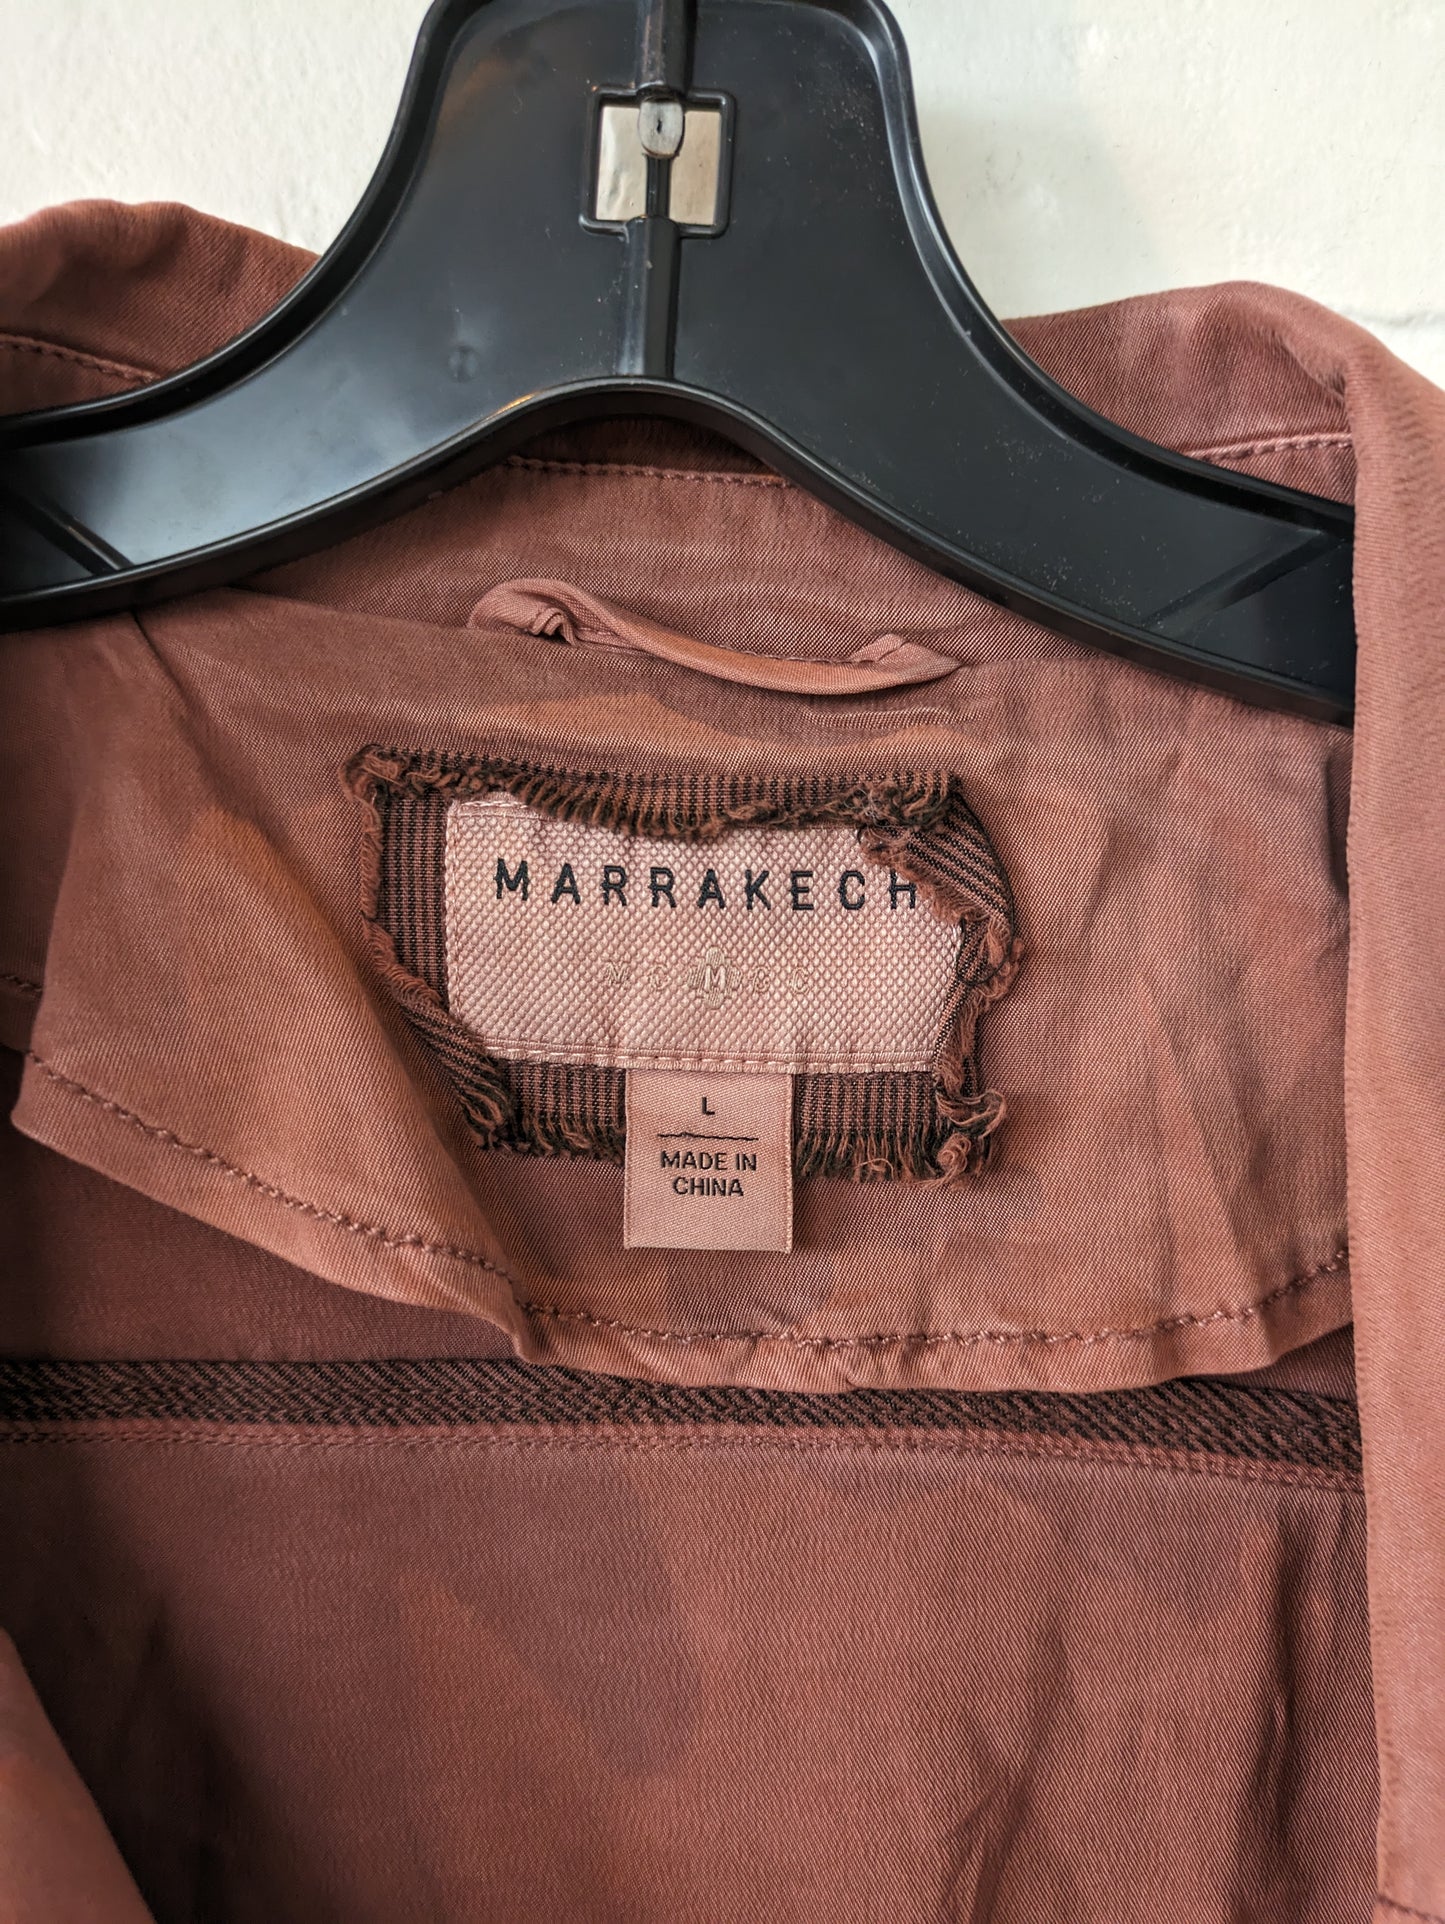 Jacket Other By Marrakech  Size: L